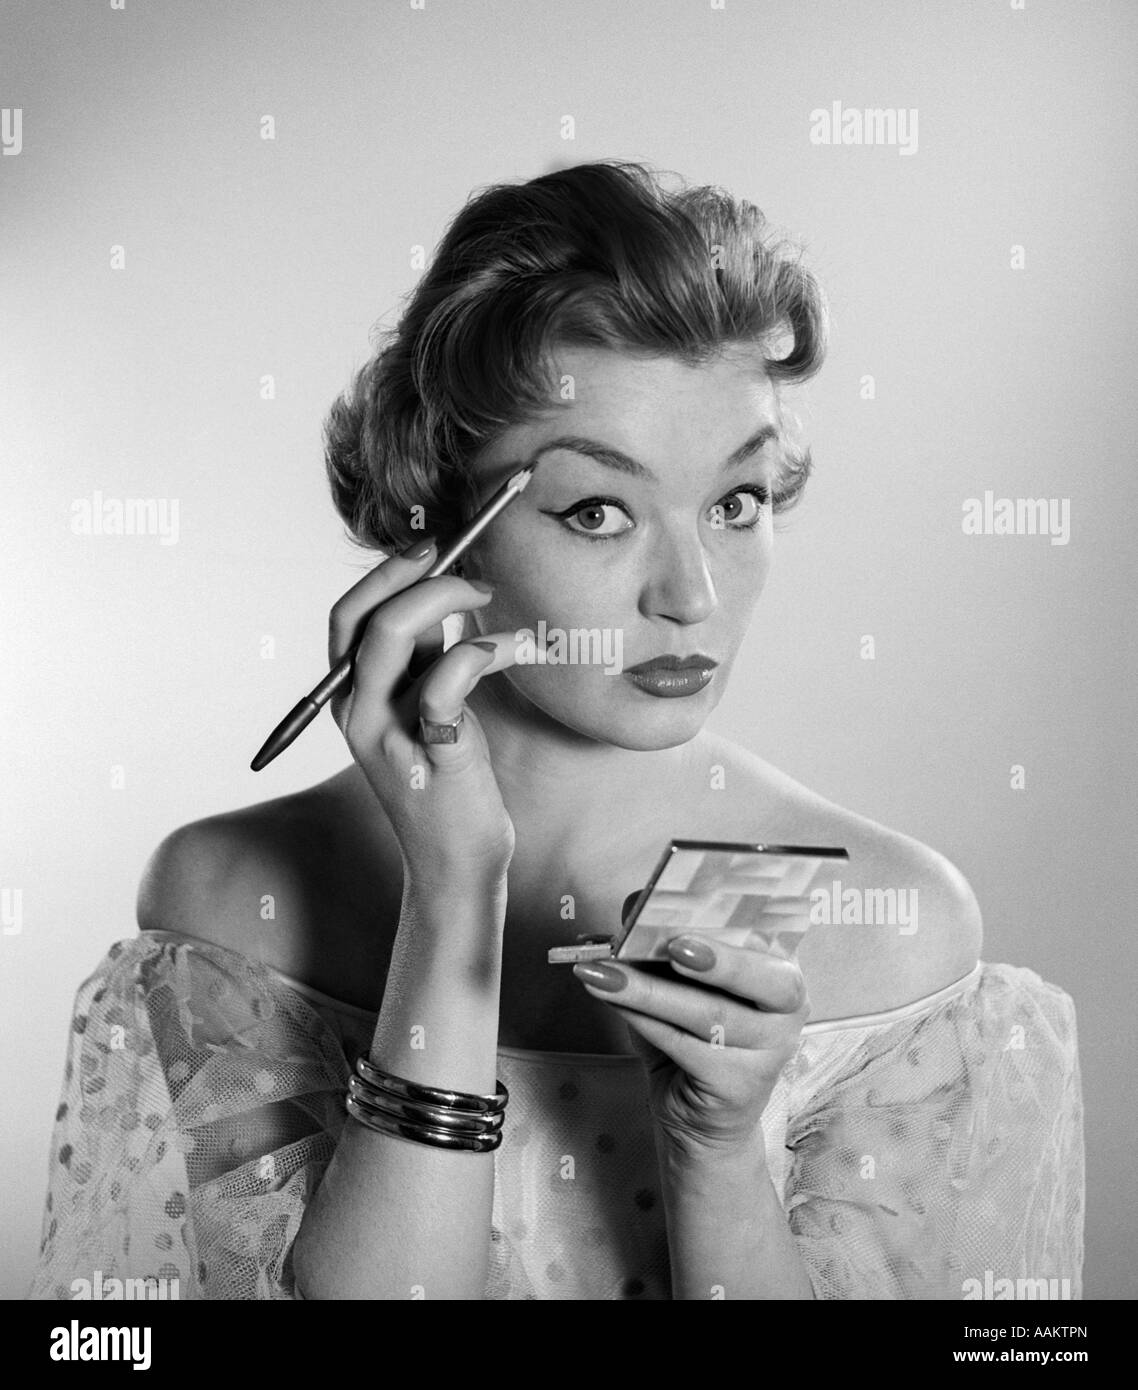 1950s 1960s WOMAN LOOKING AT CAMERA APPLYING MAKEUP EYE BROW PENCIL HOLDING COMPACT MIRROR Stock Photo